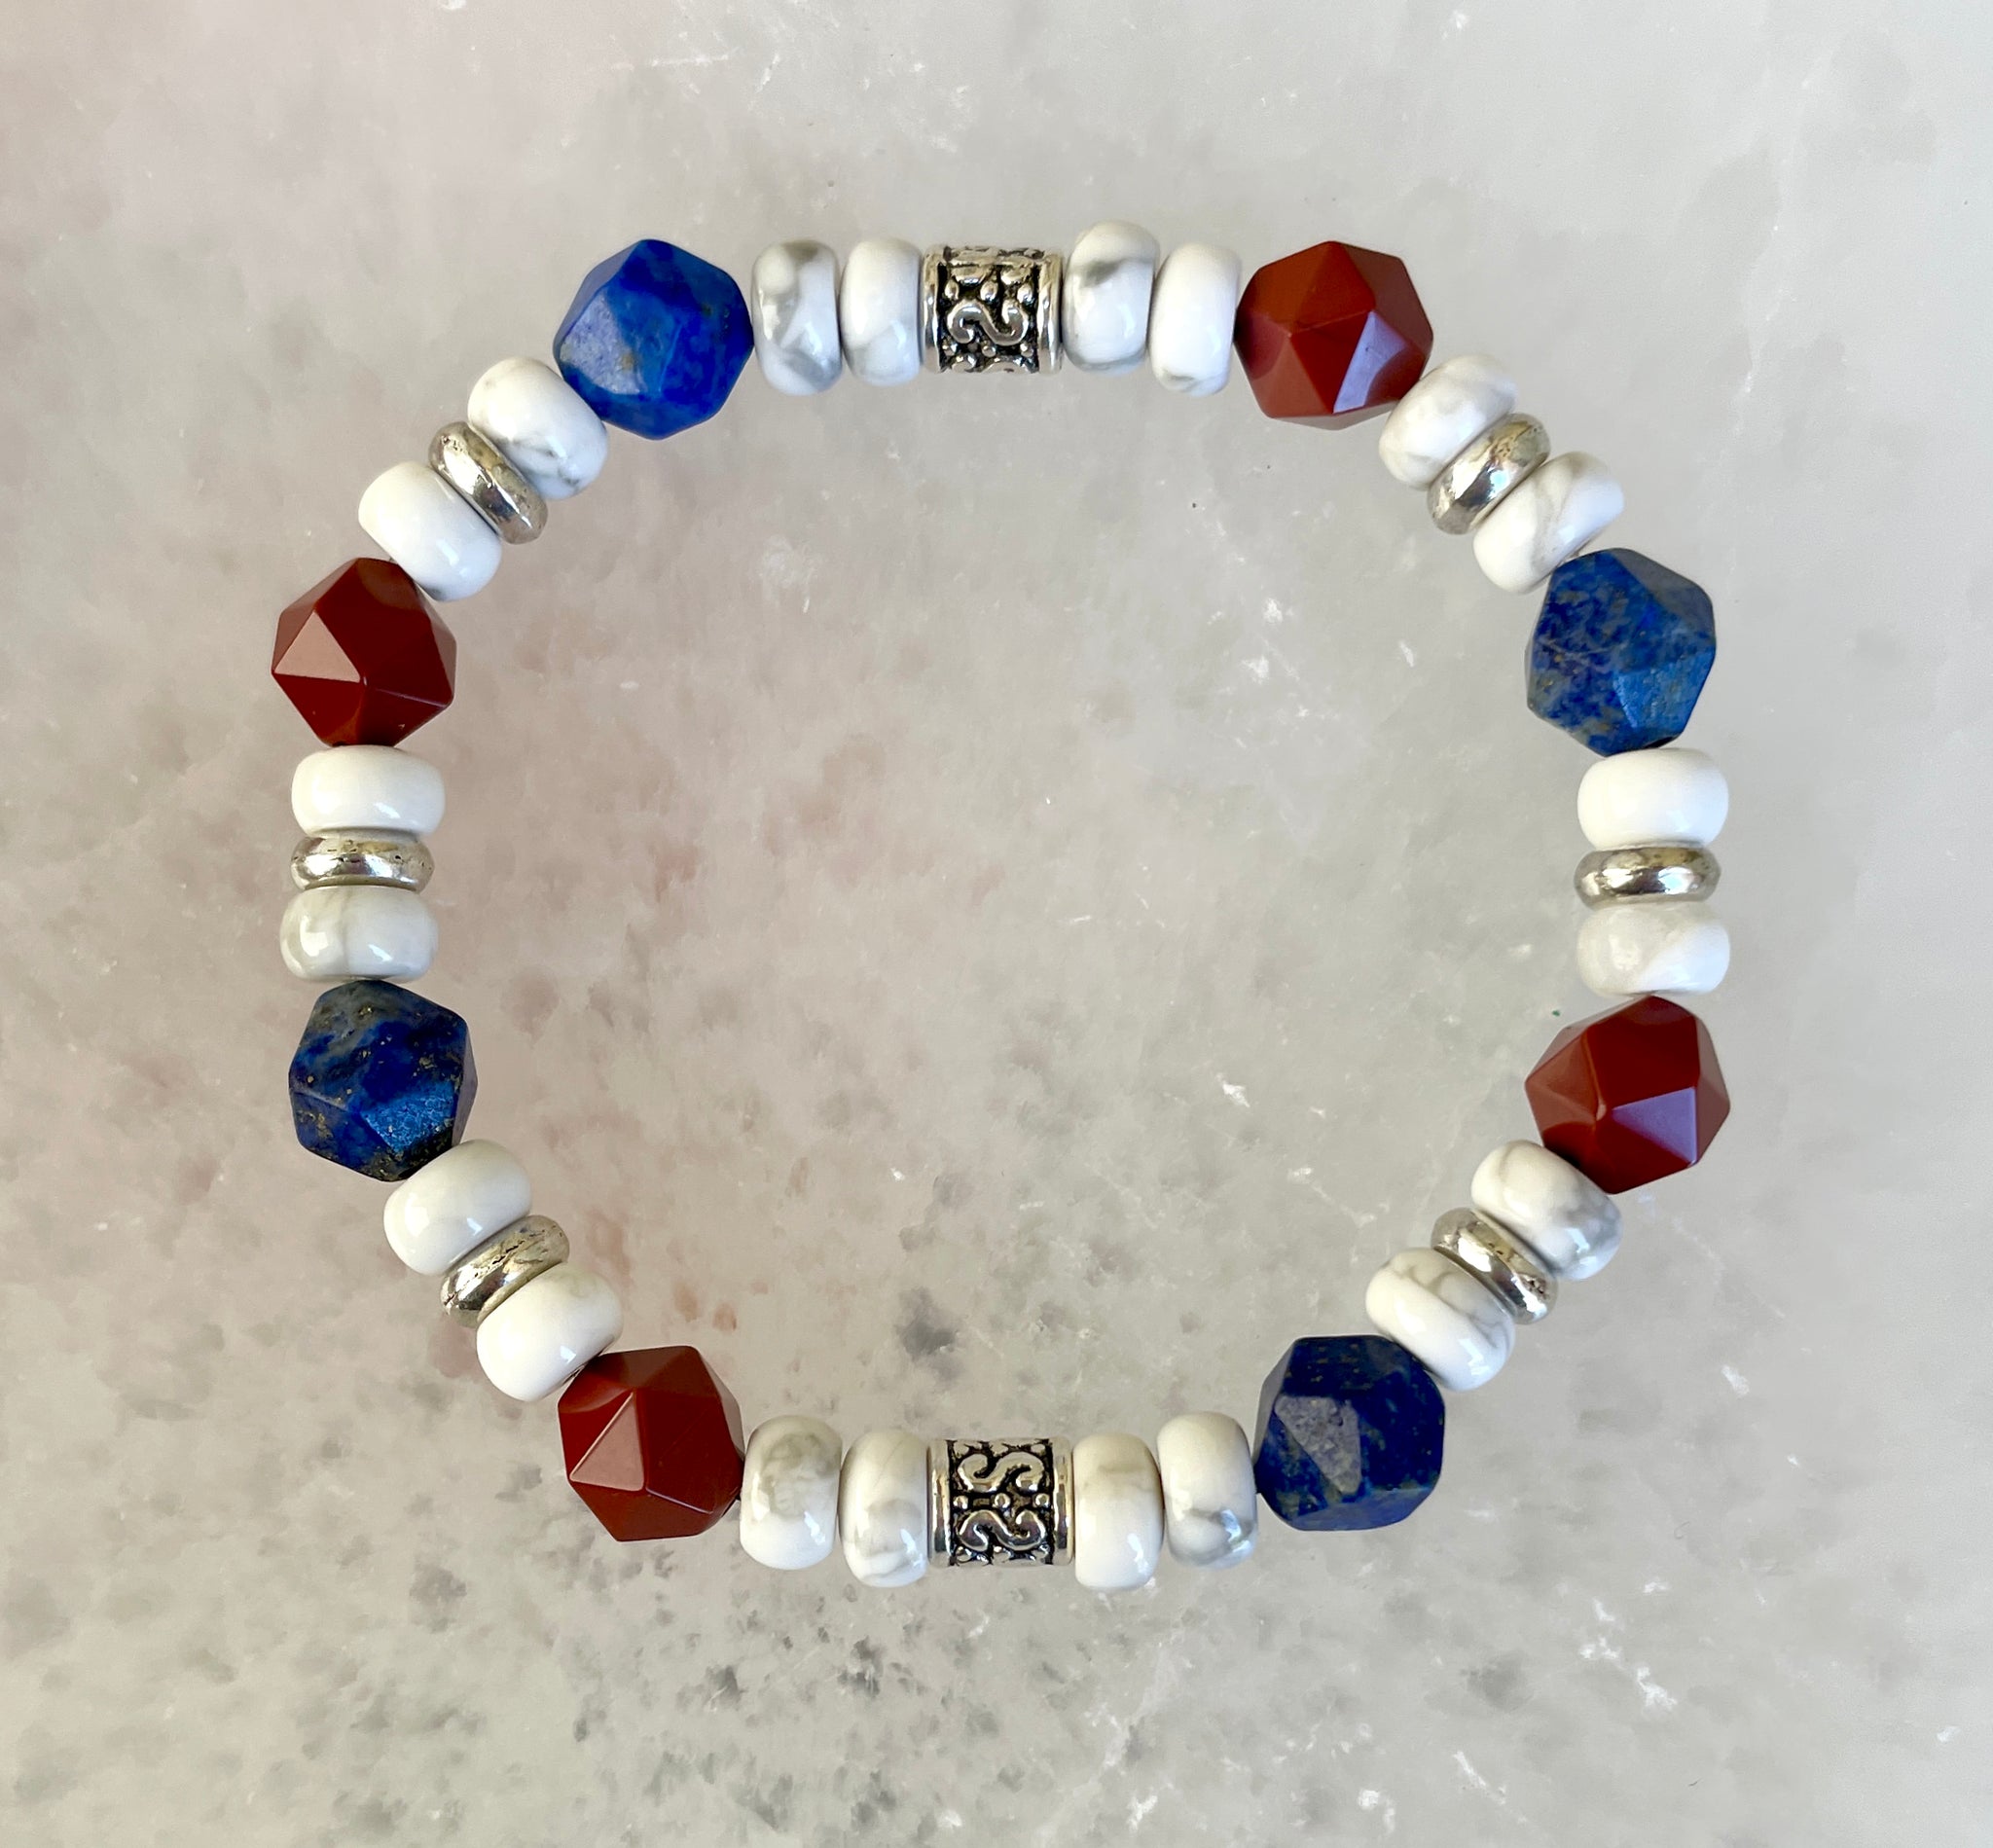 USA Independence Day 4th of July Bracelet with Red White Blue Gemstone  Hearts – Blackberry Designs Jewelry